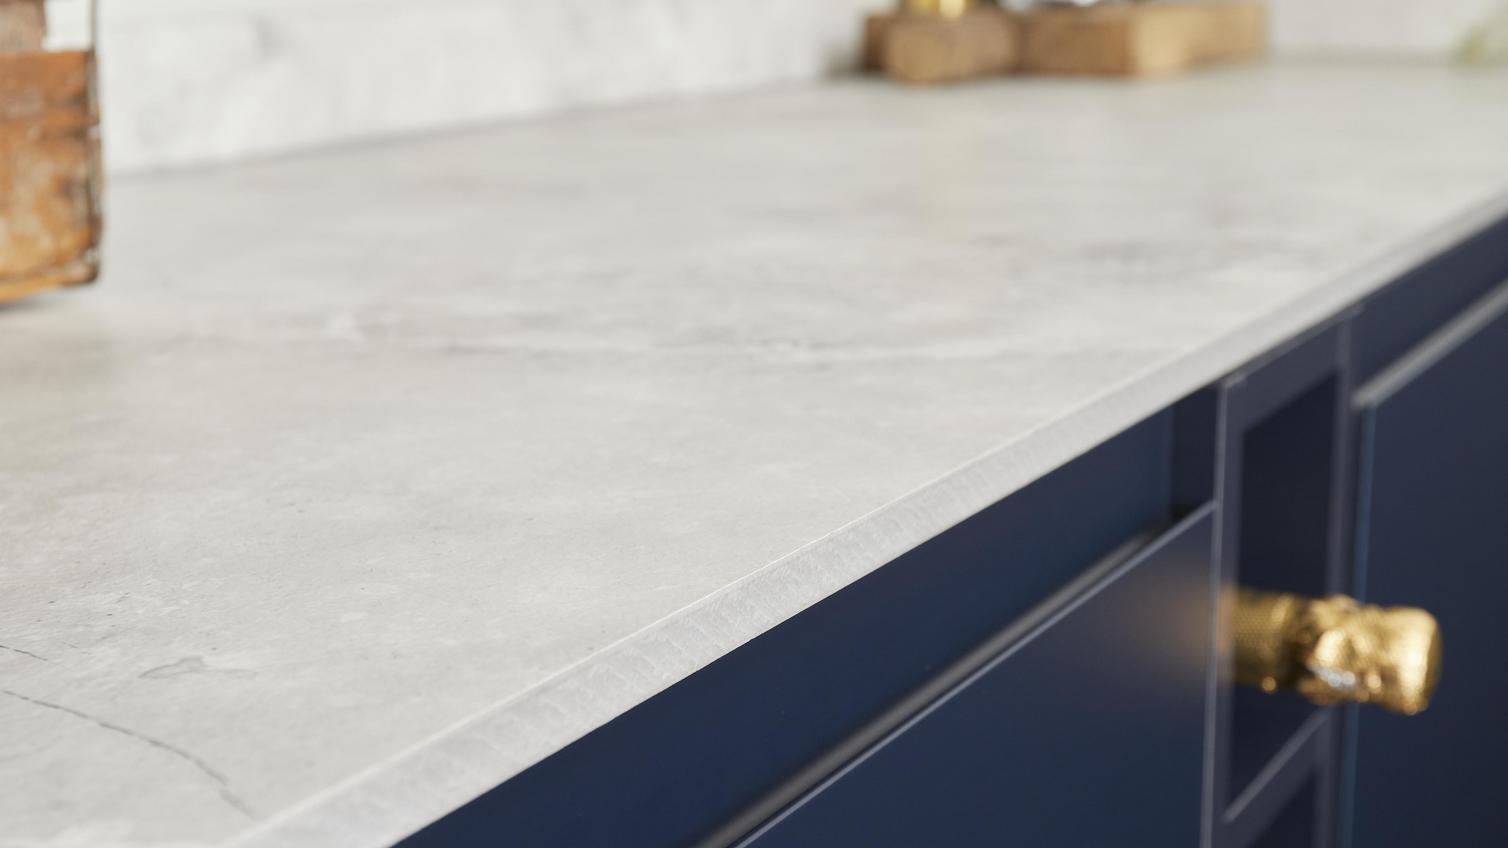 White laminate worktop with a marble-effect pattern, fitted onto navy kitchen cabinets.